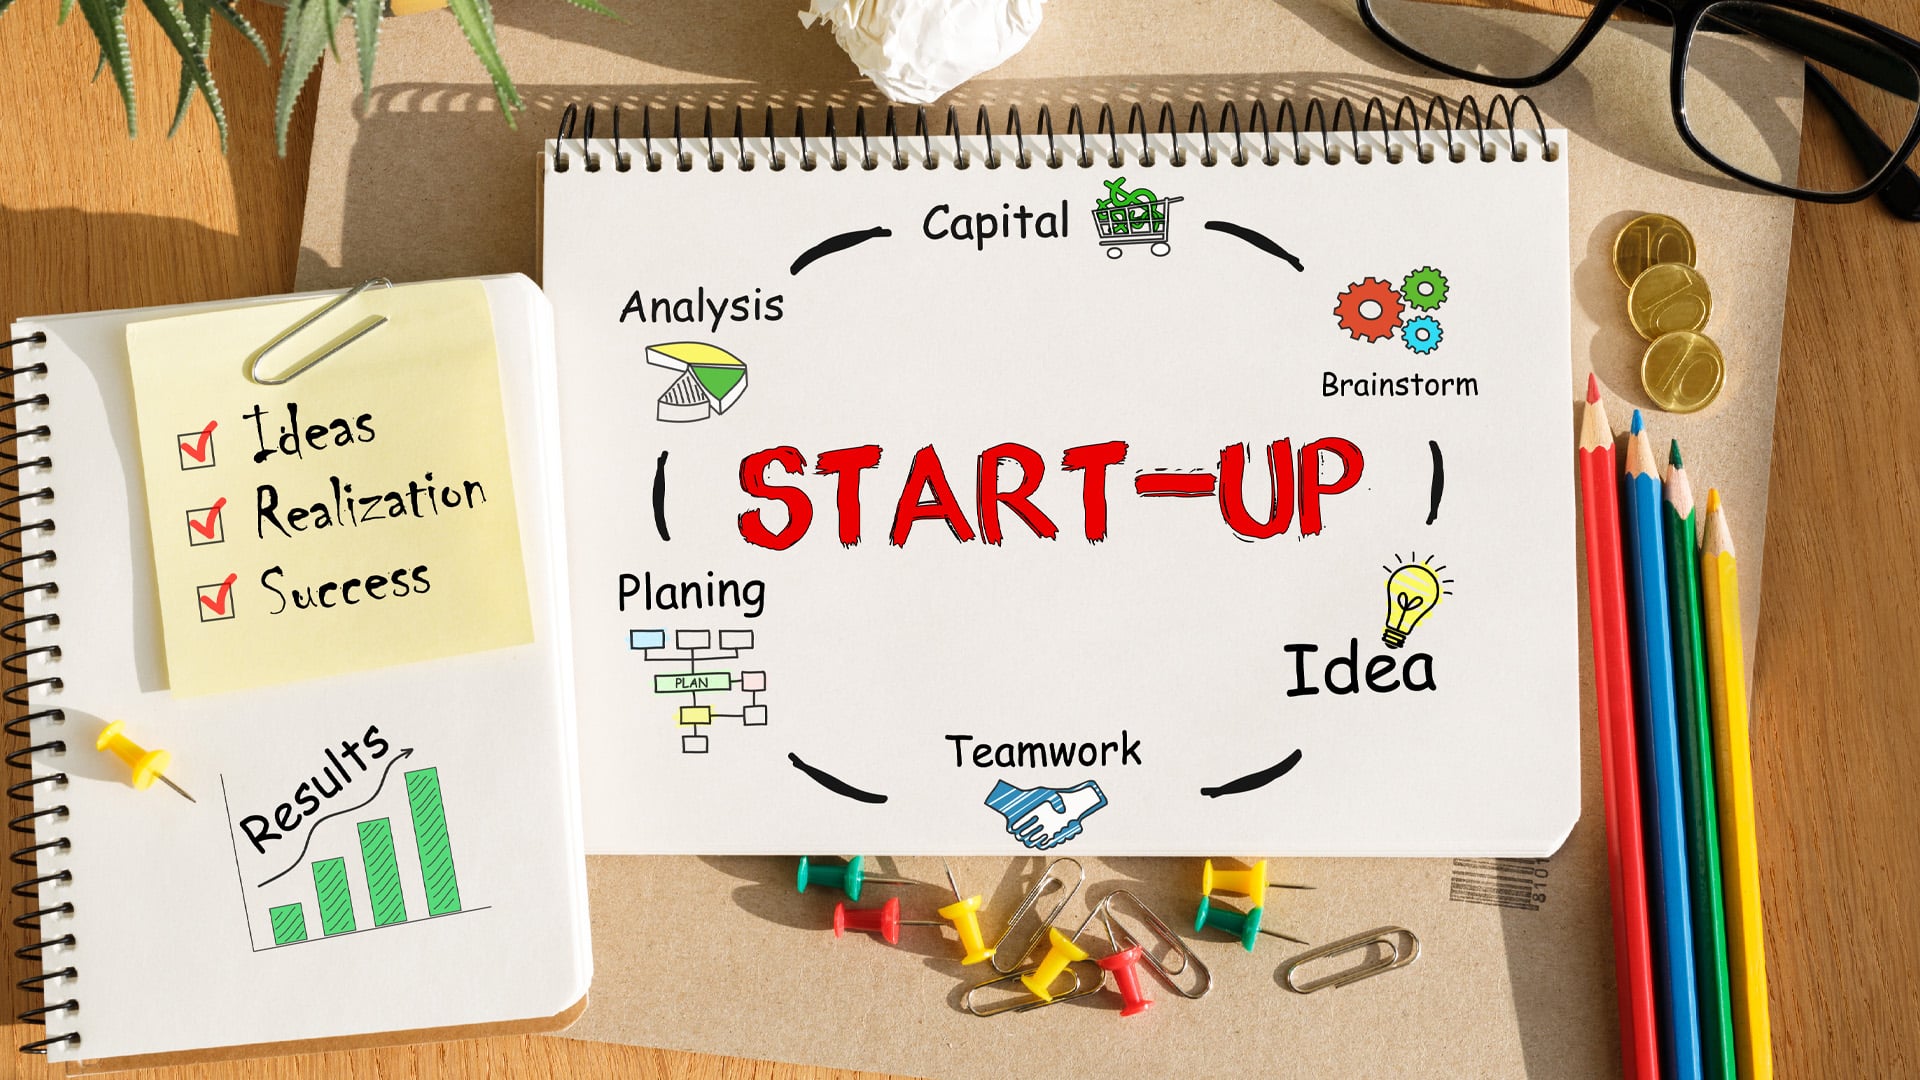 West Bengal encouraging start-ups: Minister